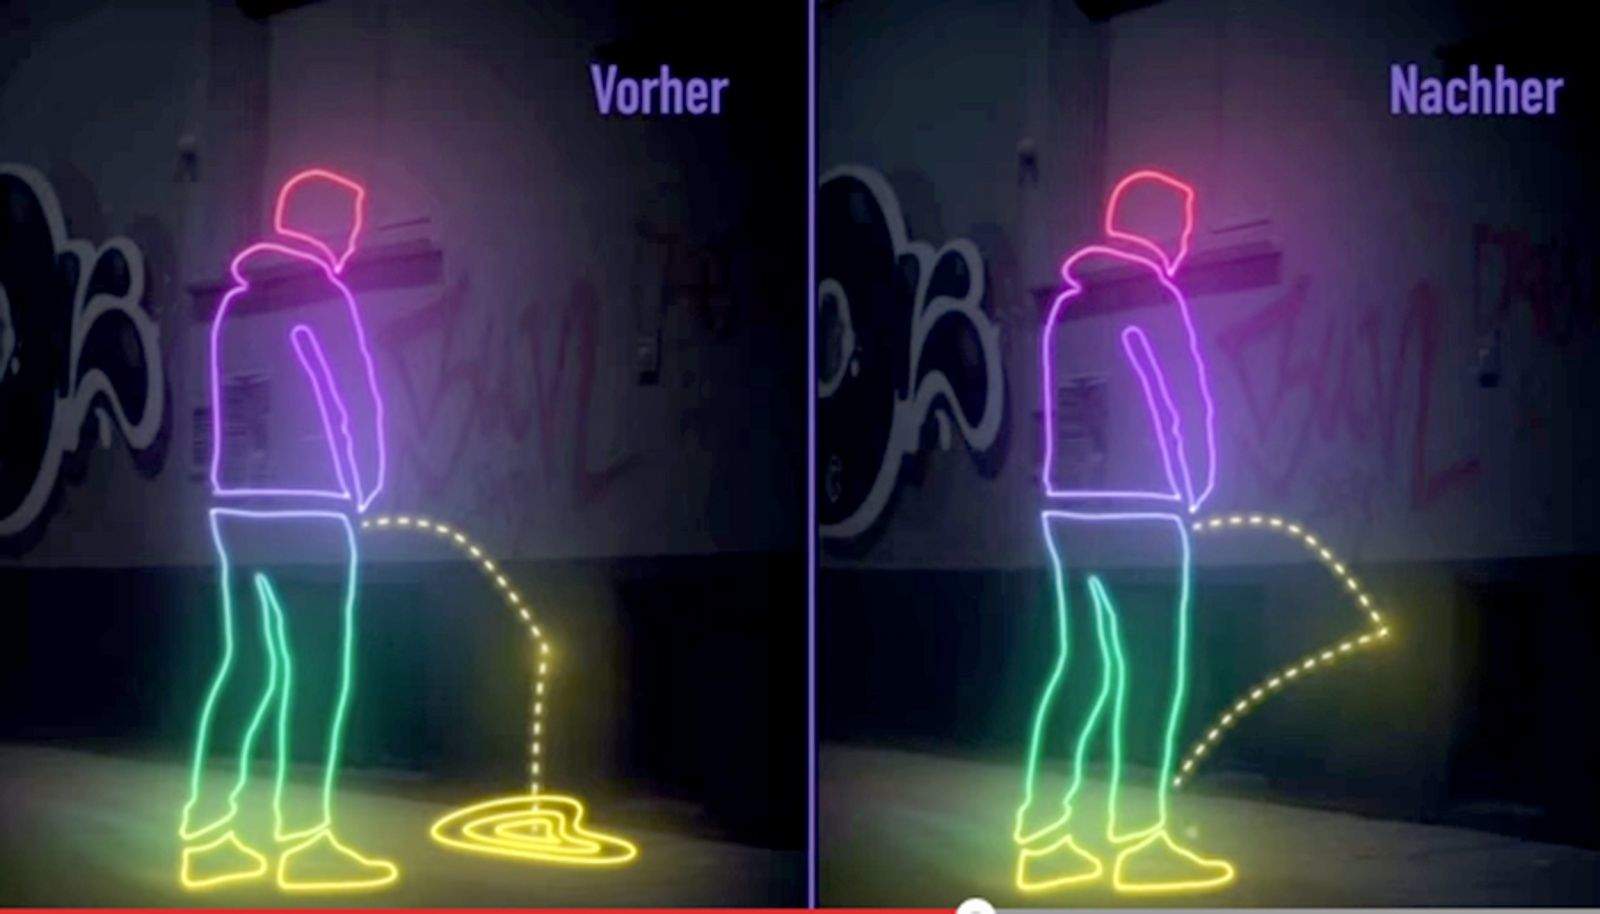 Activist have applied a superhydrophobic coating to areas of St. Pauli in Hamburg, Germany to create splashback on those who urinate in public. Graphic: St Pauli's Community of Interest/YouTube